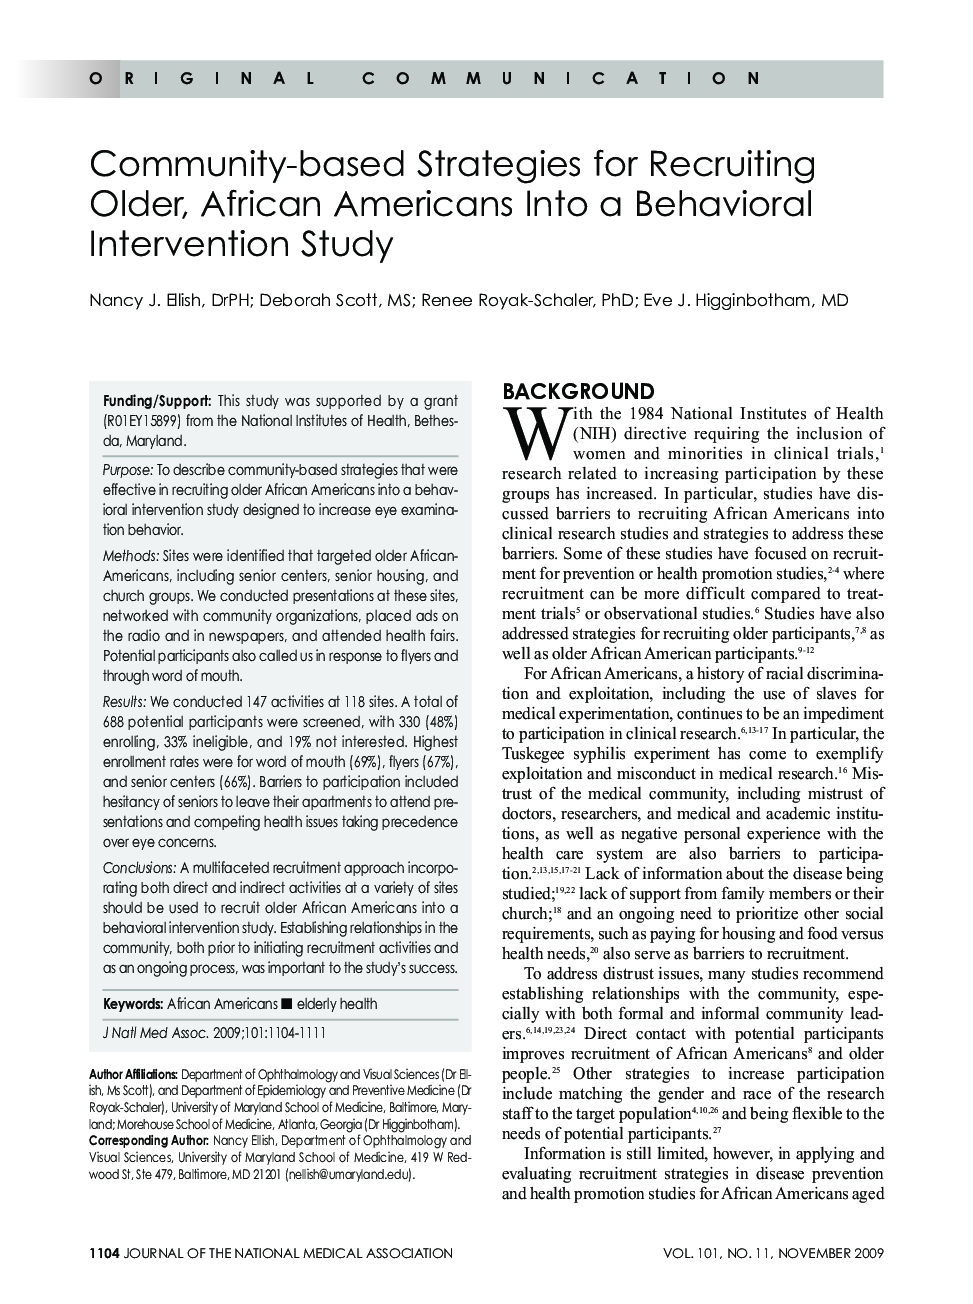 Community-based Strategies for Recruiting Older, African Americans Into a Behavioral Intervention Study